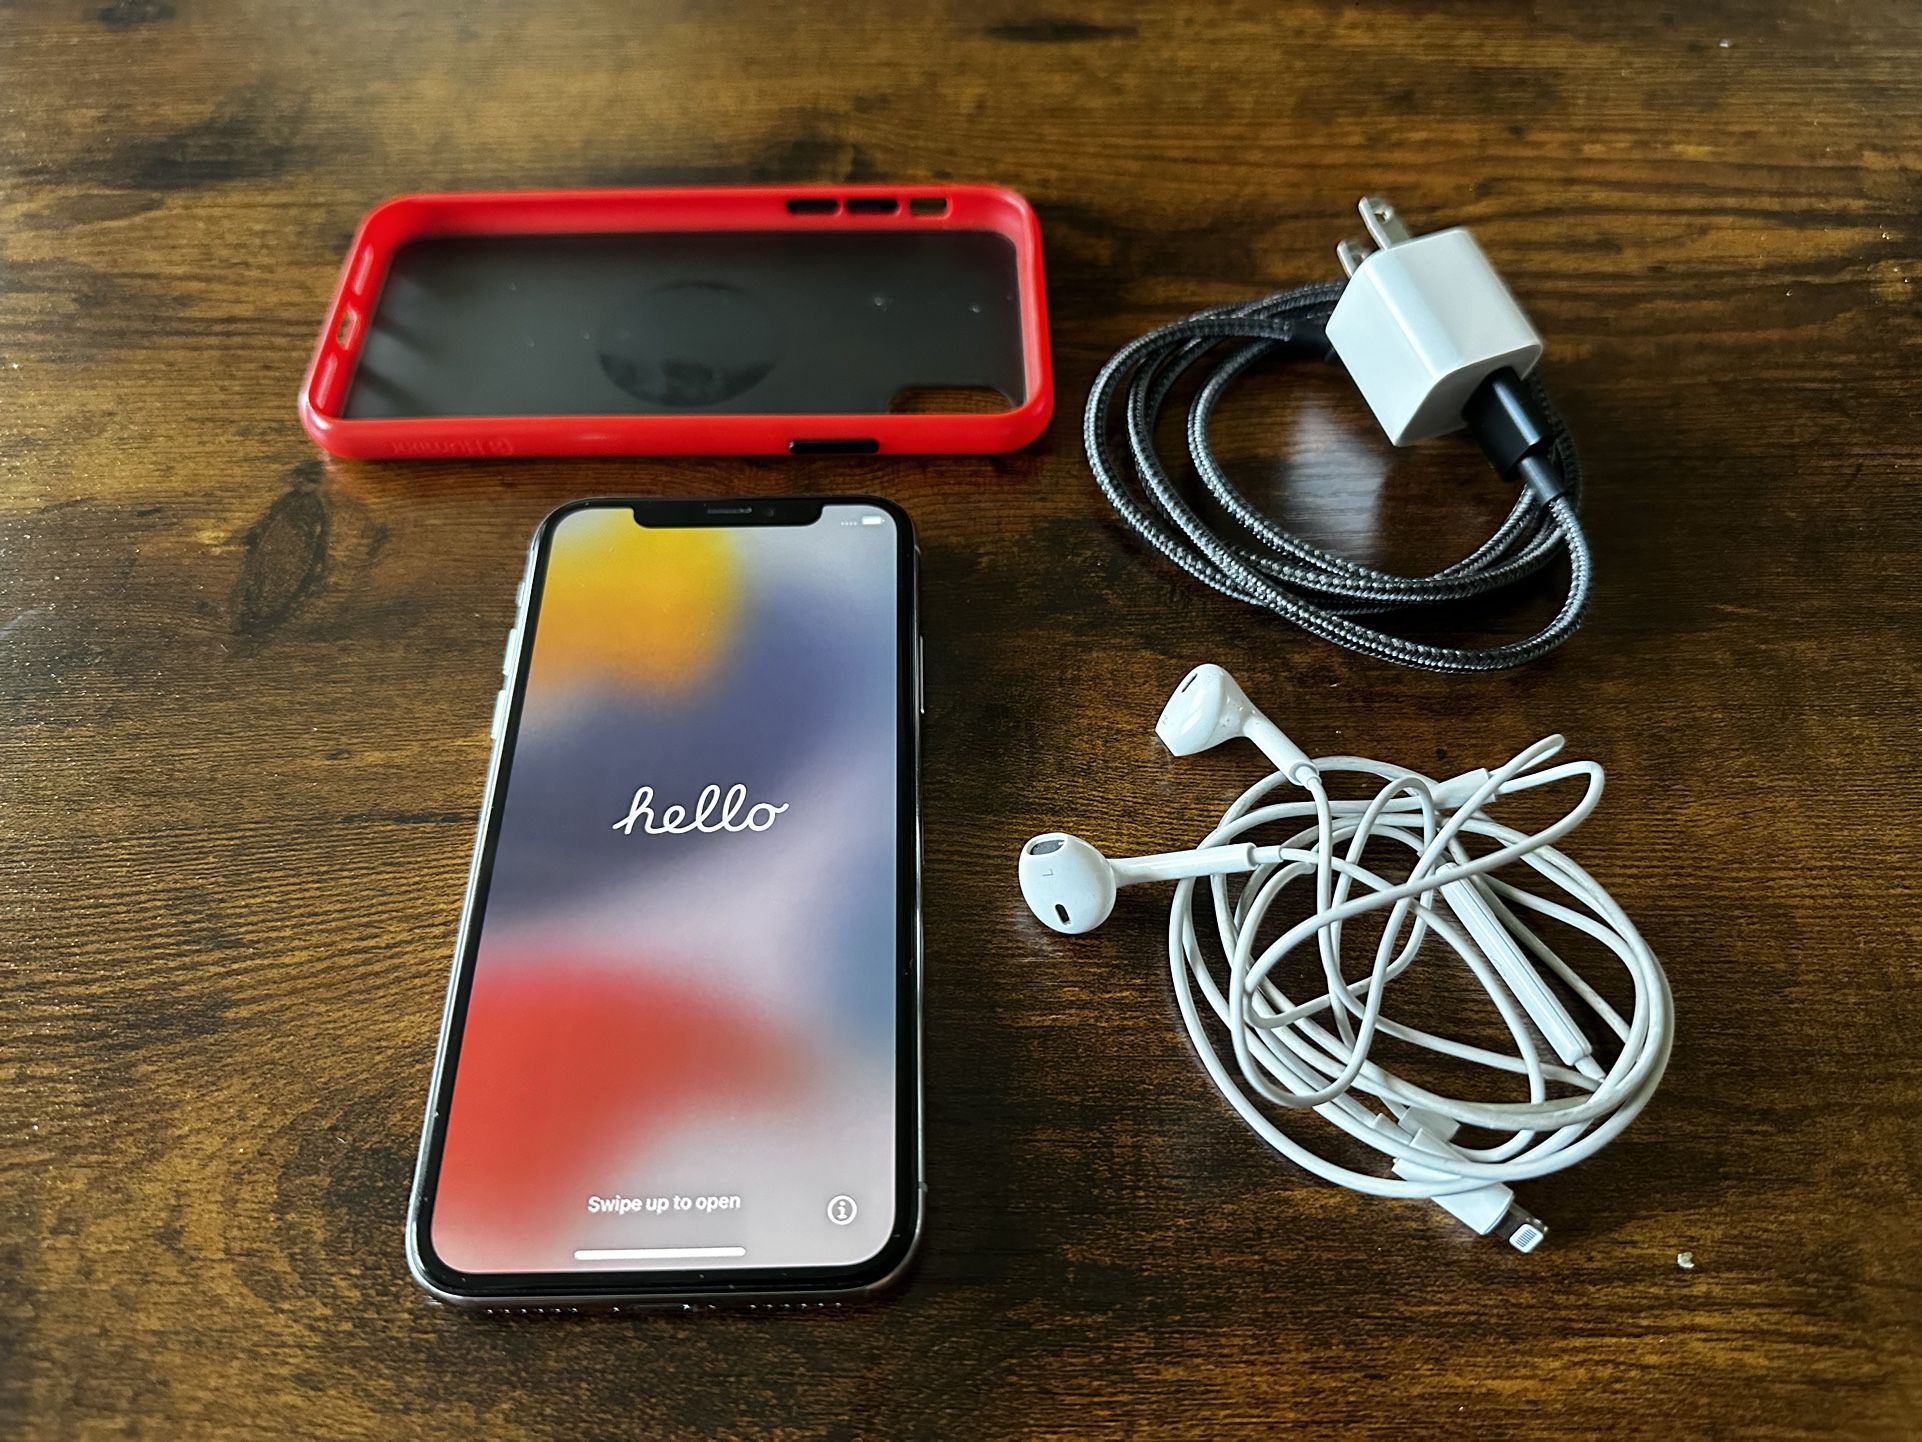 Apple iPhone X 256GB White Unlocked With Accessories